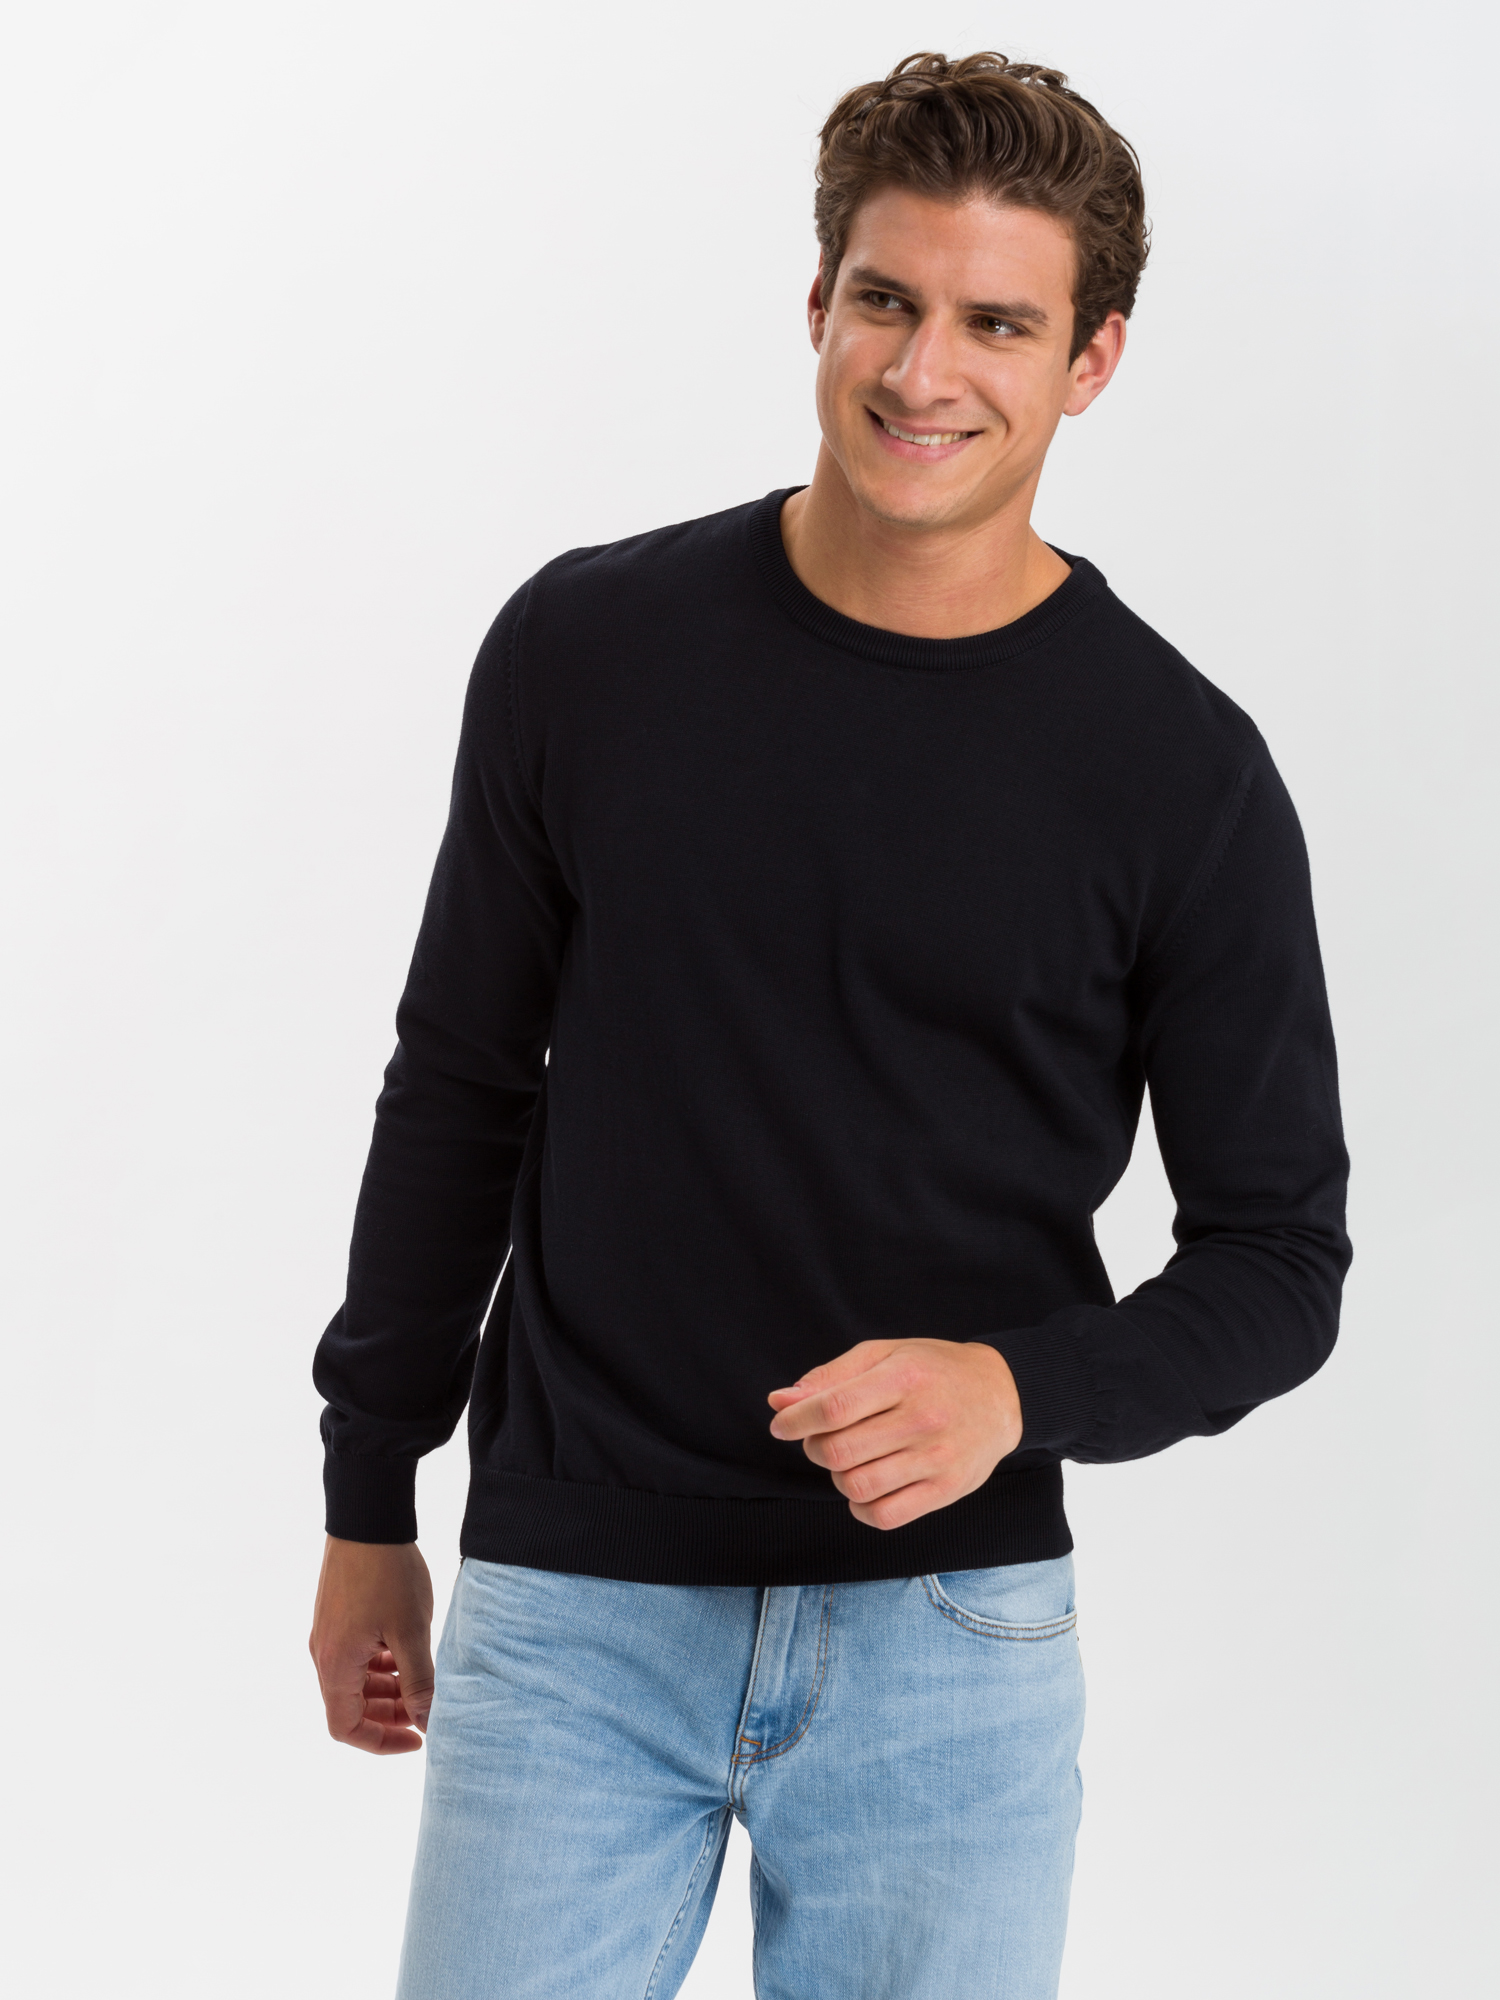 CROSS JEANS Strickpullover dried tomato Longsleeve mit Rundhals 34156-529